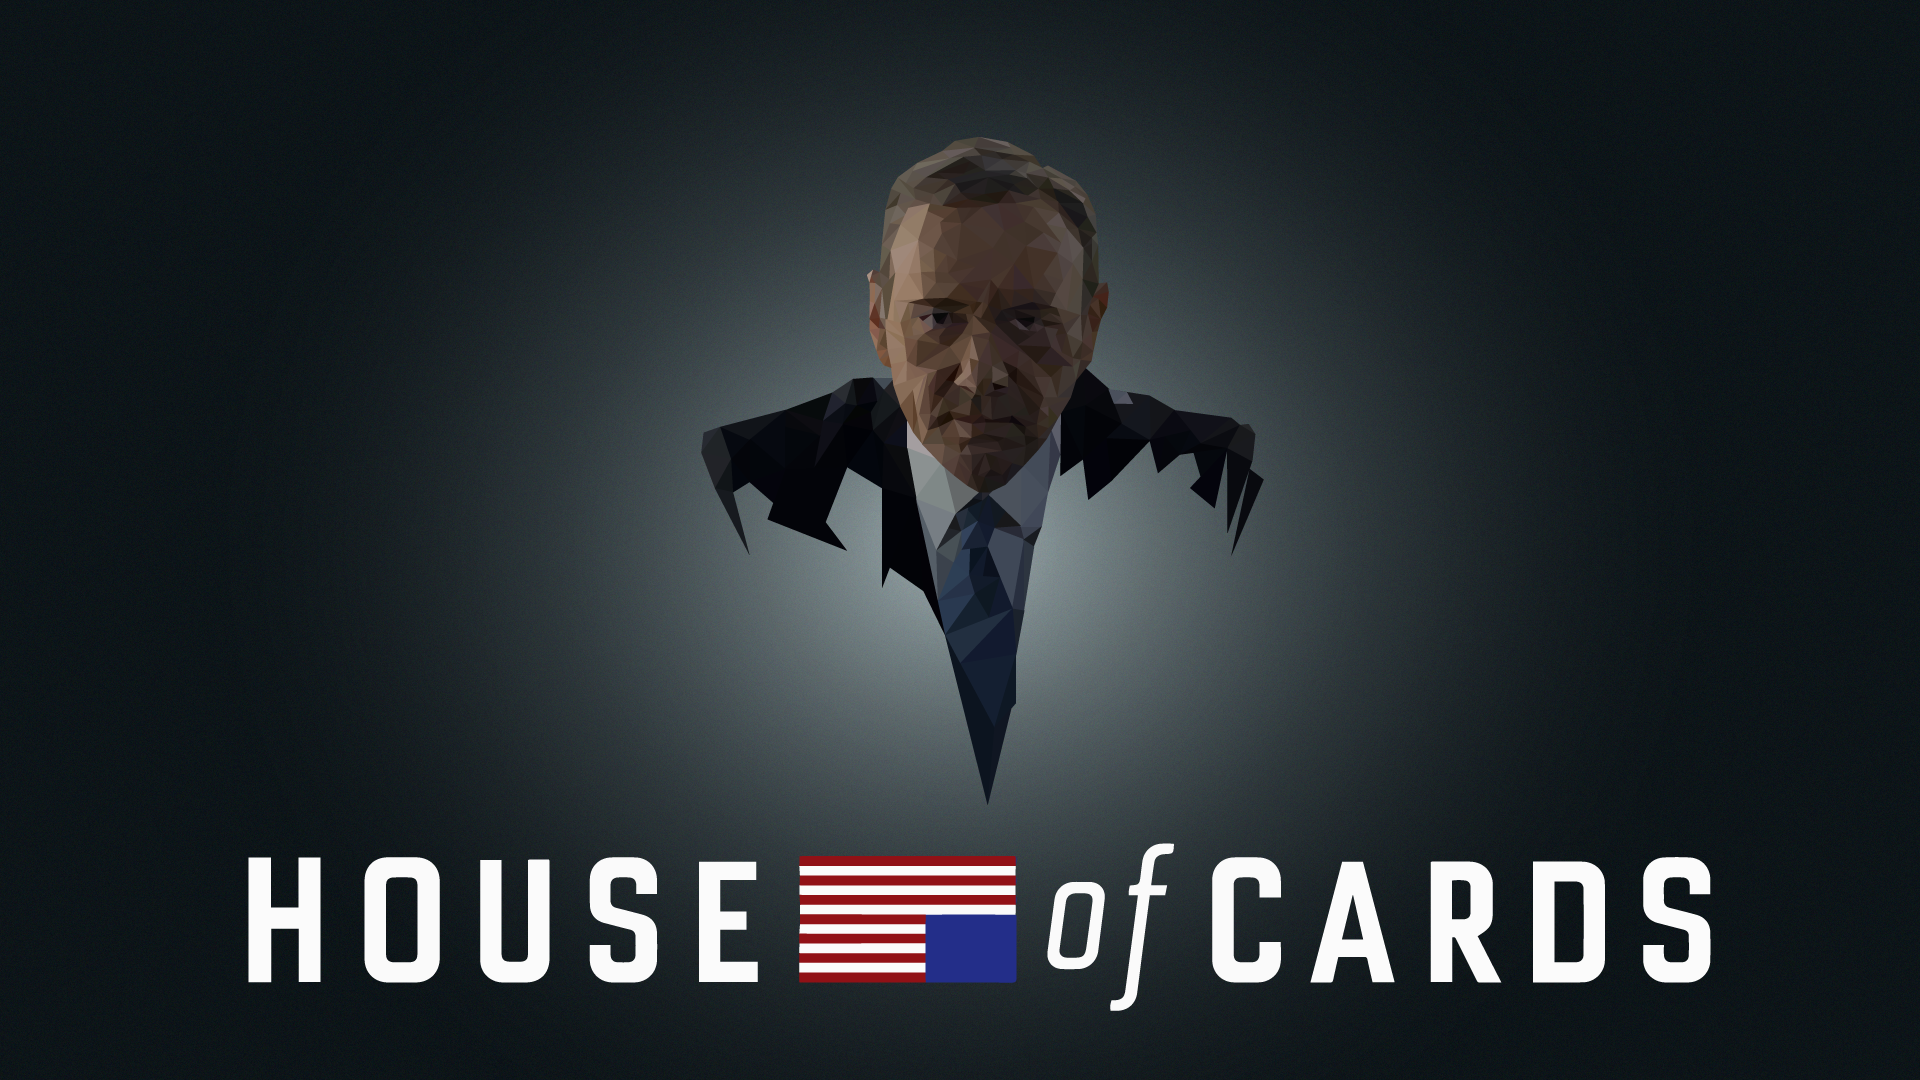 House of Cards Wallpapers Just Good Vibe 1920x1080